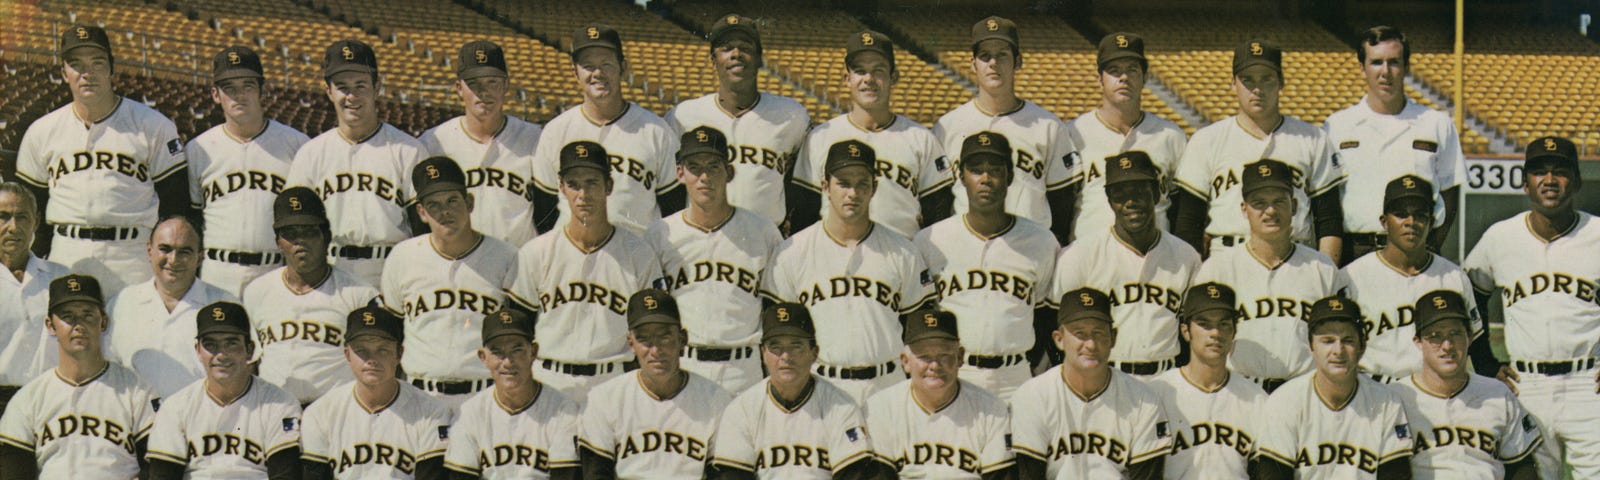 Blue replaced brown on Padres uniforms in 1991, by FriarWire